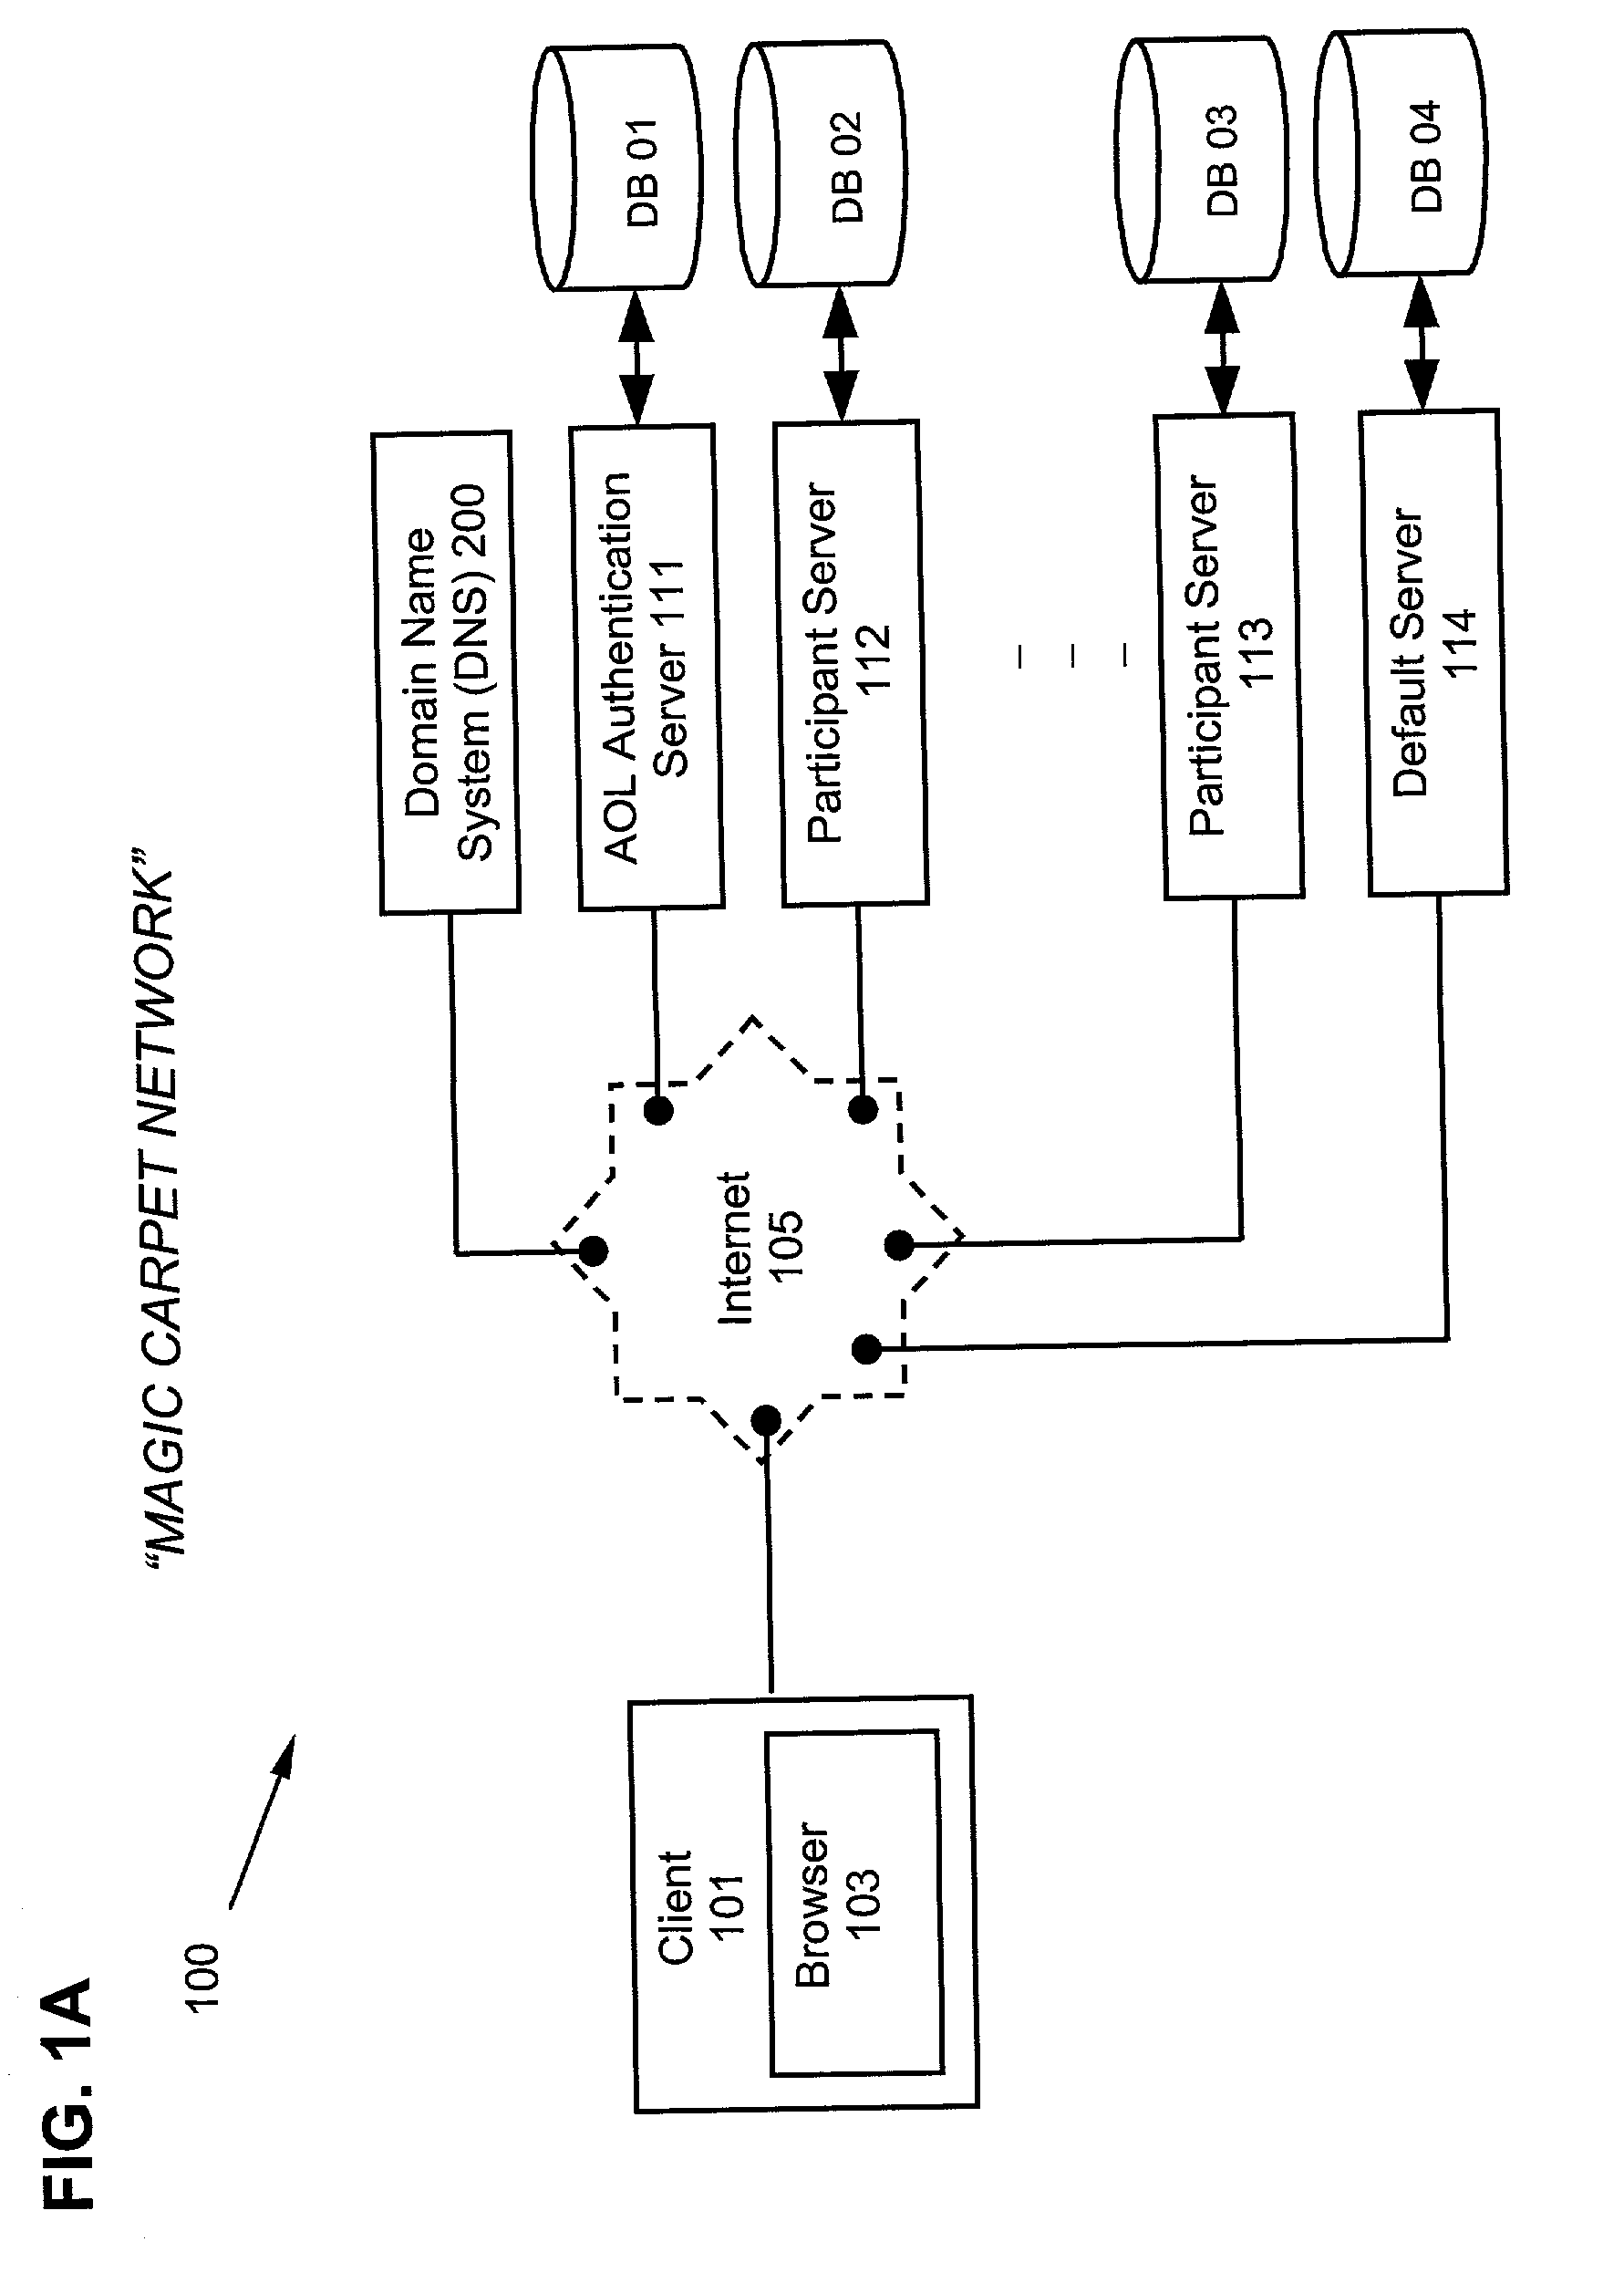 System and method for distributed authentication service